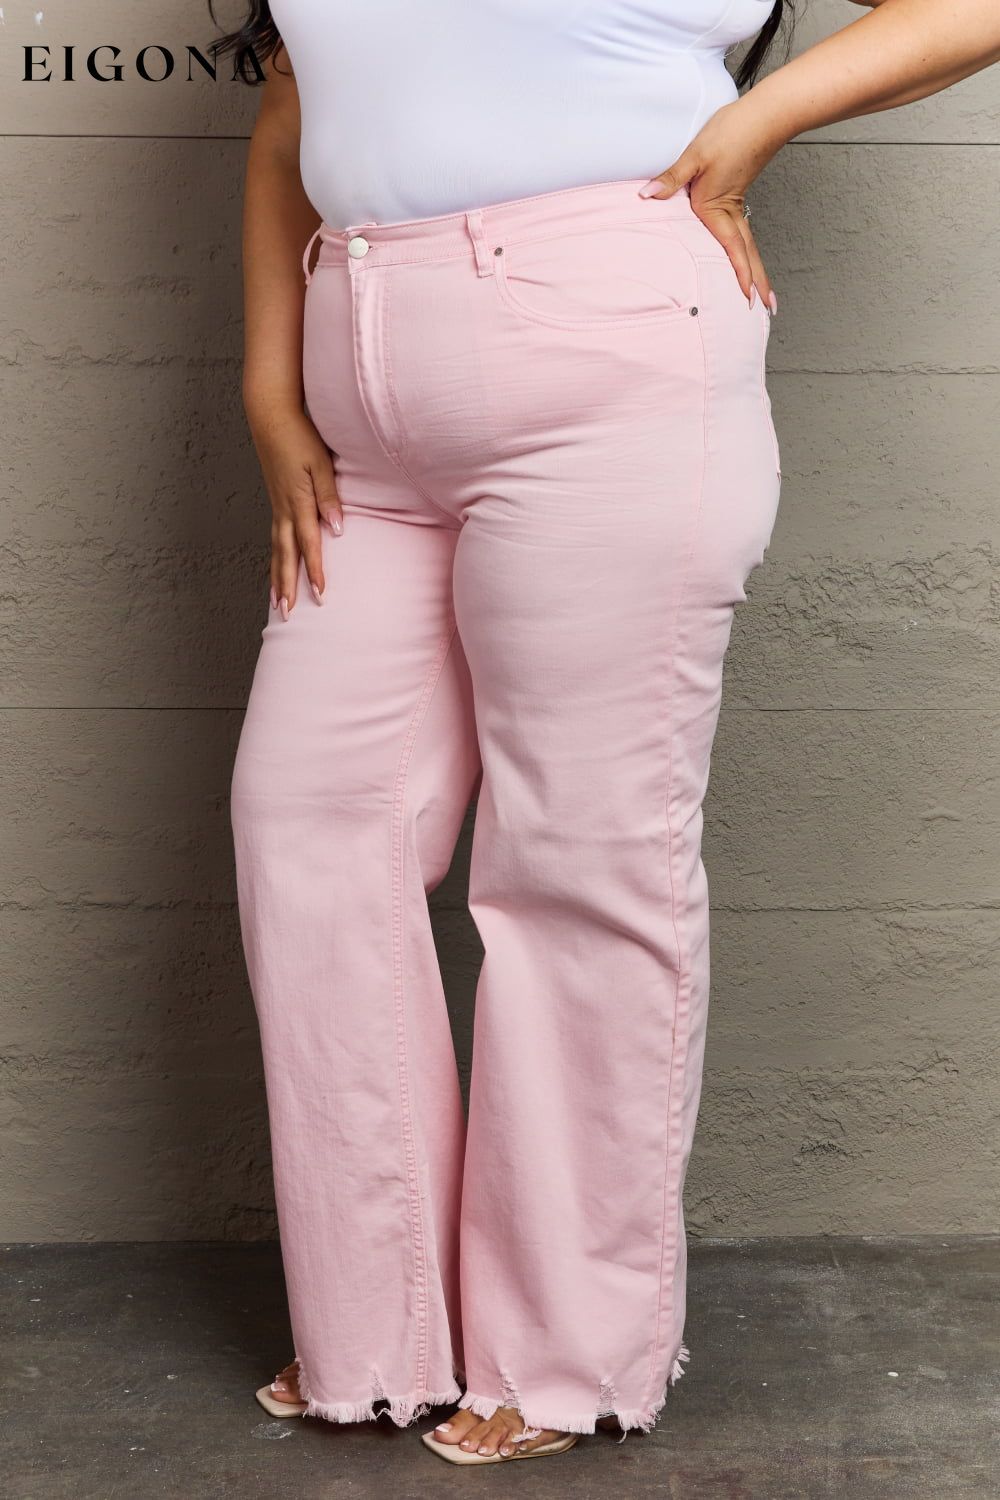 Full Size High Waist Wide Leg Jeans in Light Pink BFCM - Up to 25 Percent Off Black Friday bottoms clothes Jeans pants pink jeans RISEN Ship from USA trend trendy Women's Bottoms